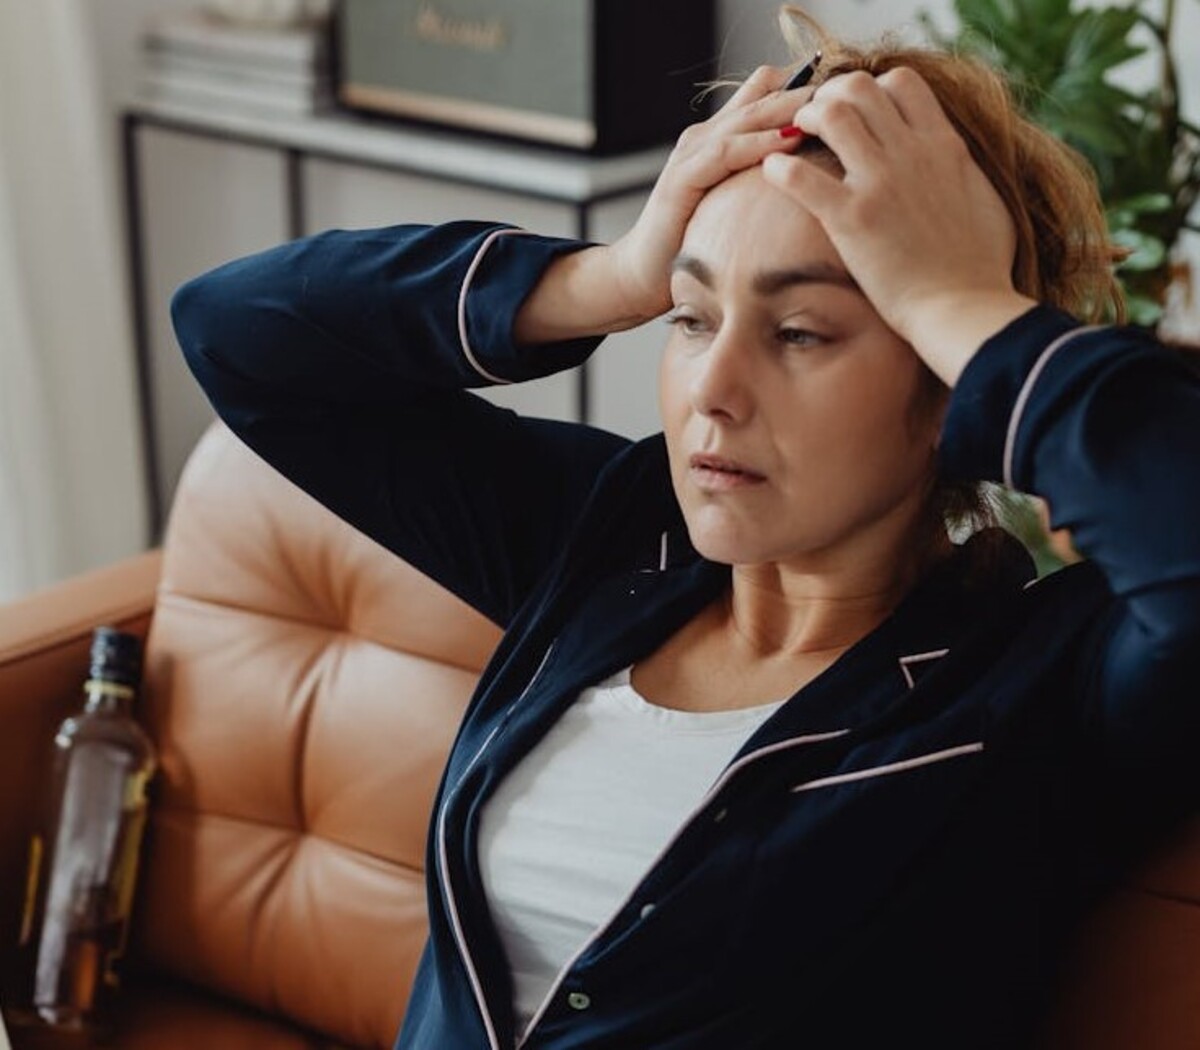 A frustrated woman holding her head | Source: Pexels